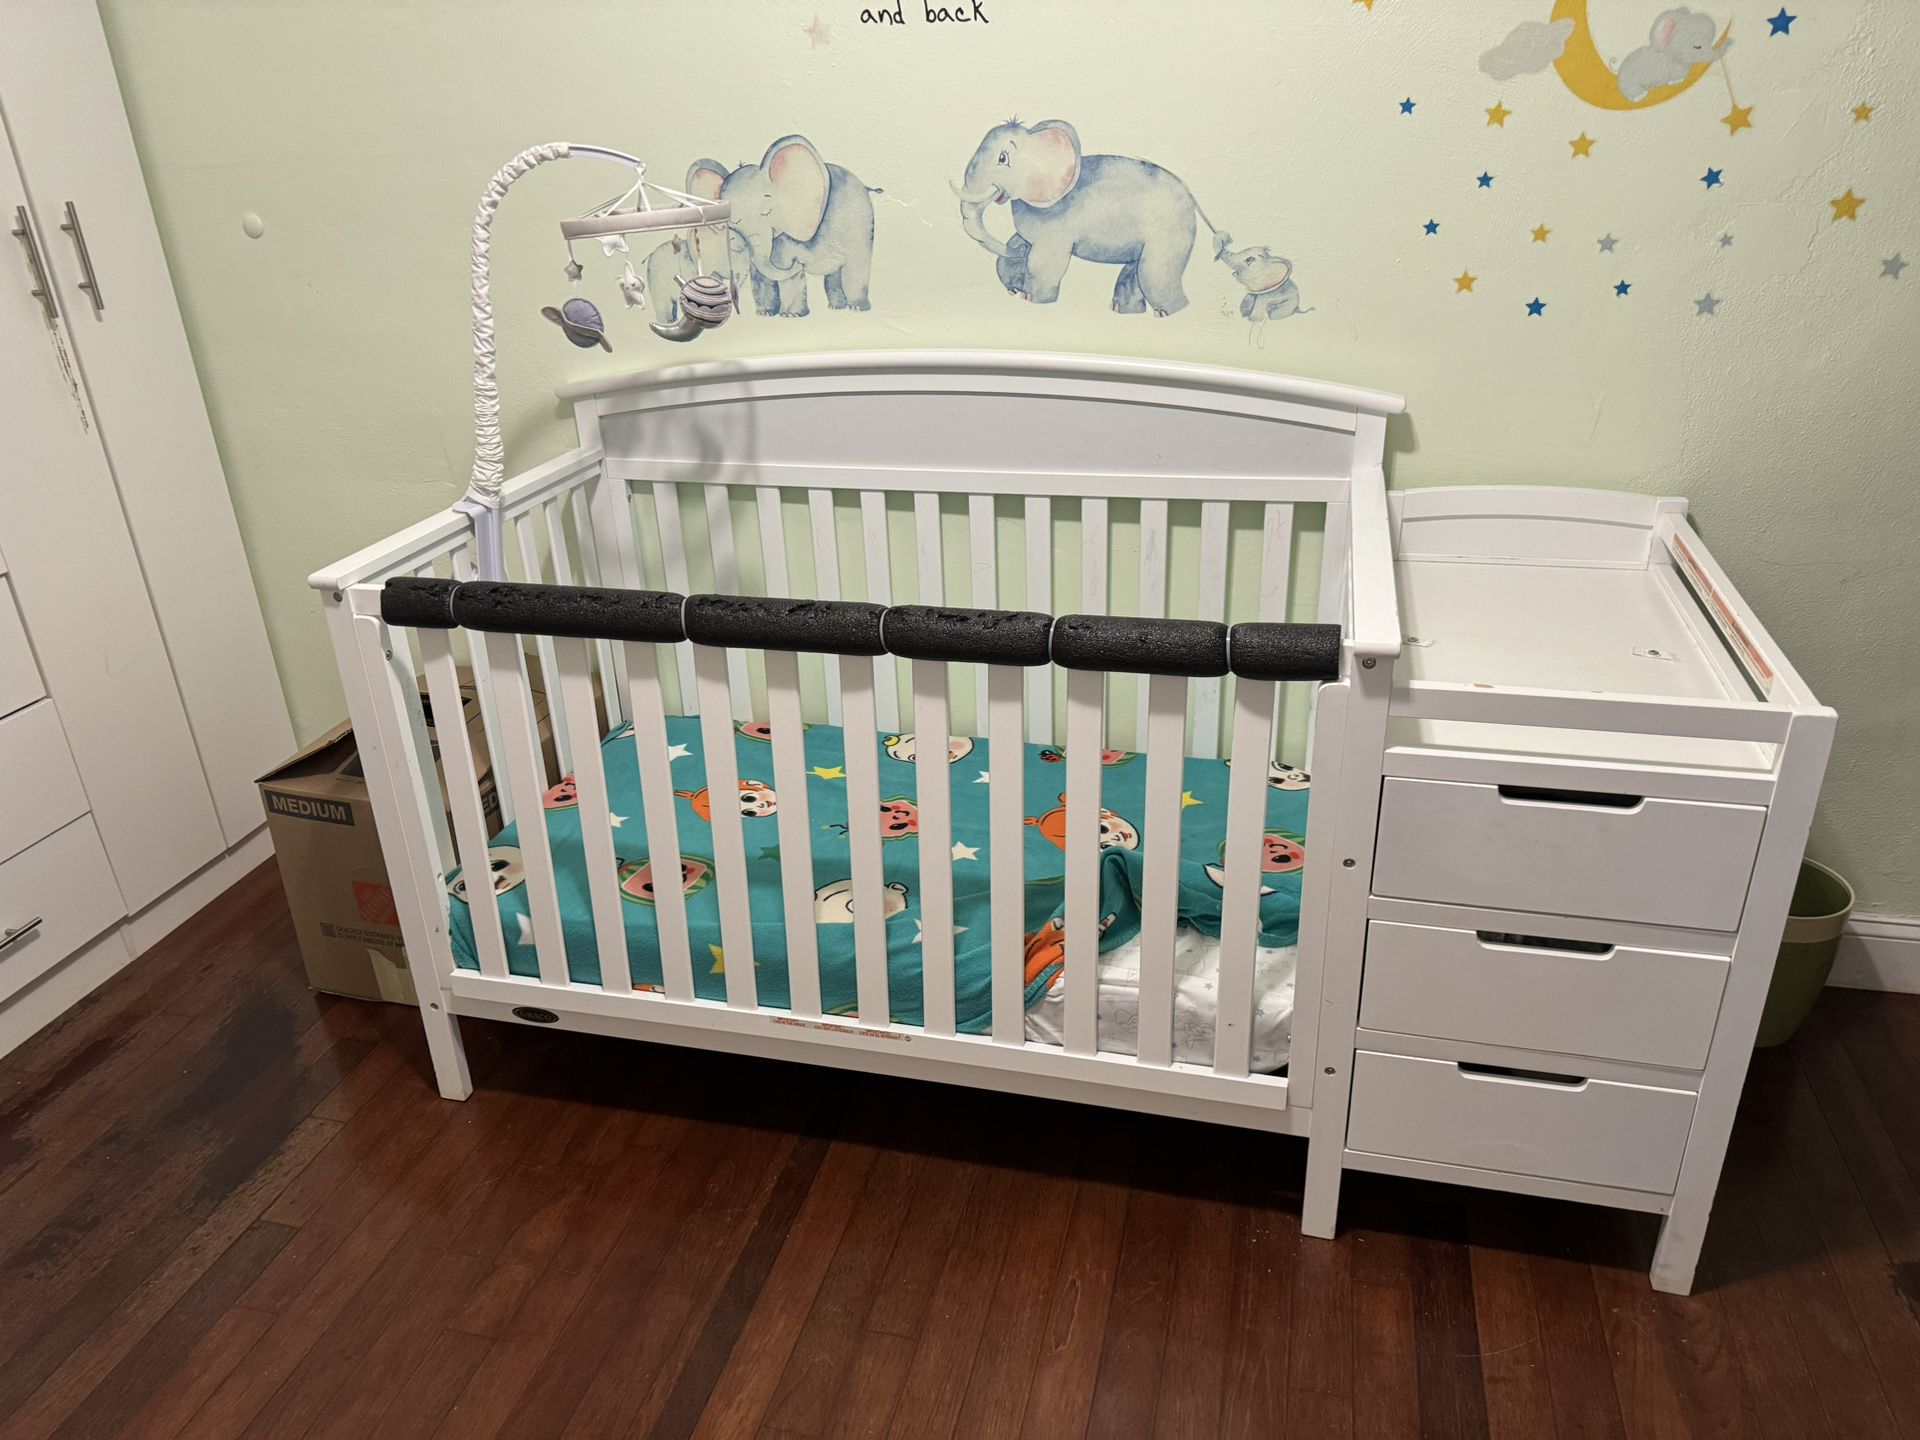 Gracco Baby Crib With Cabinets And Storage On The Side